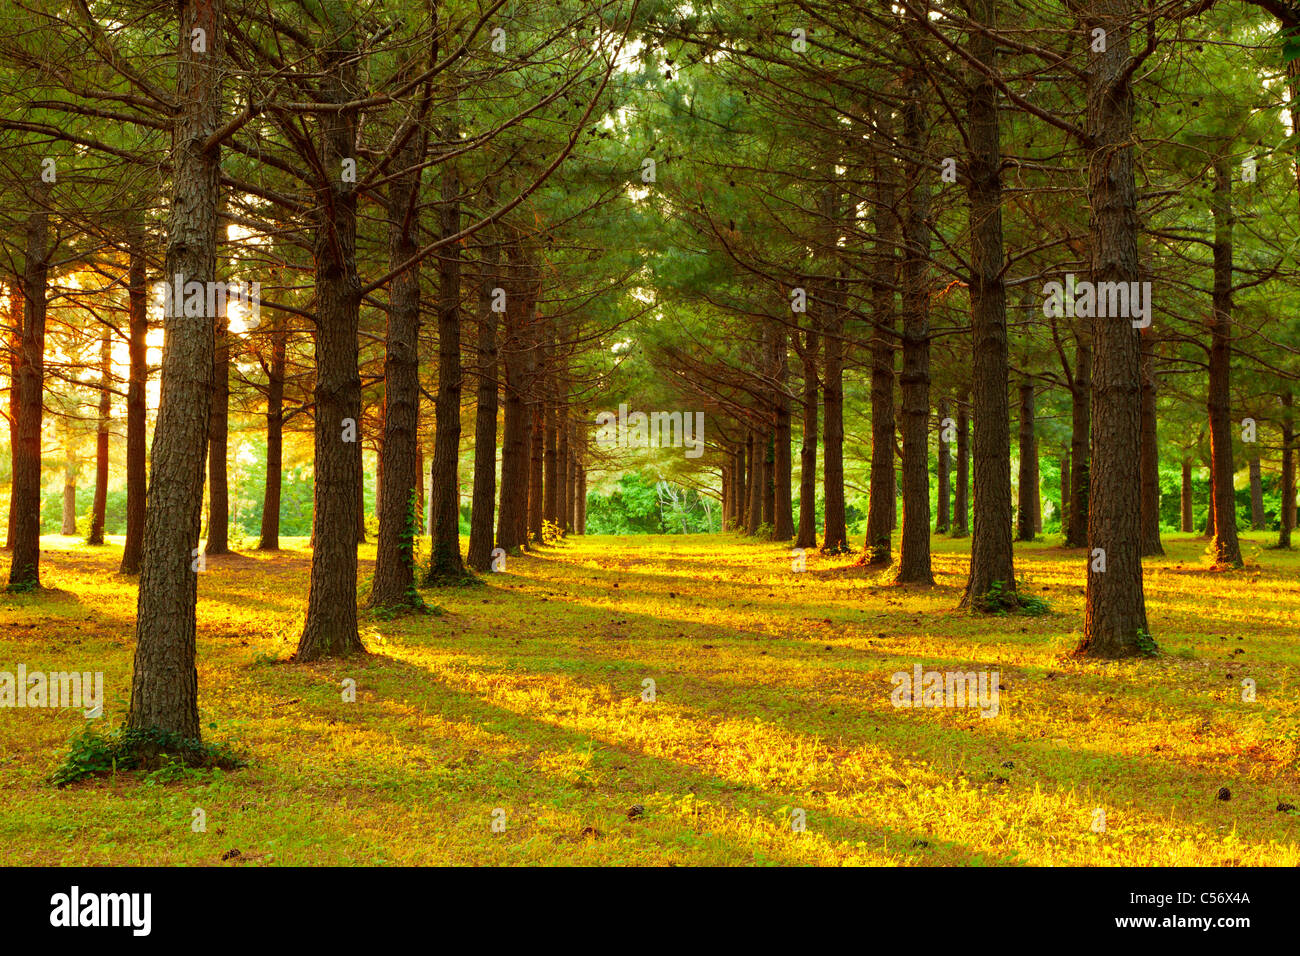 Planted pine forest Stock Photo